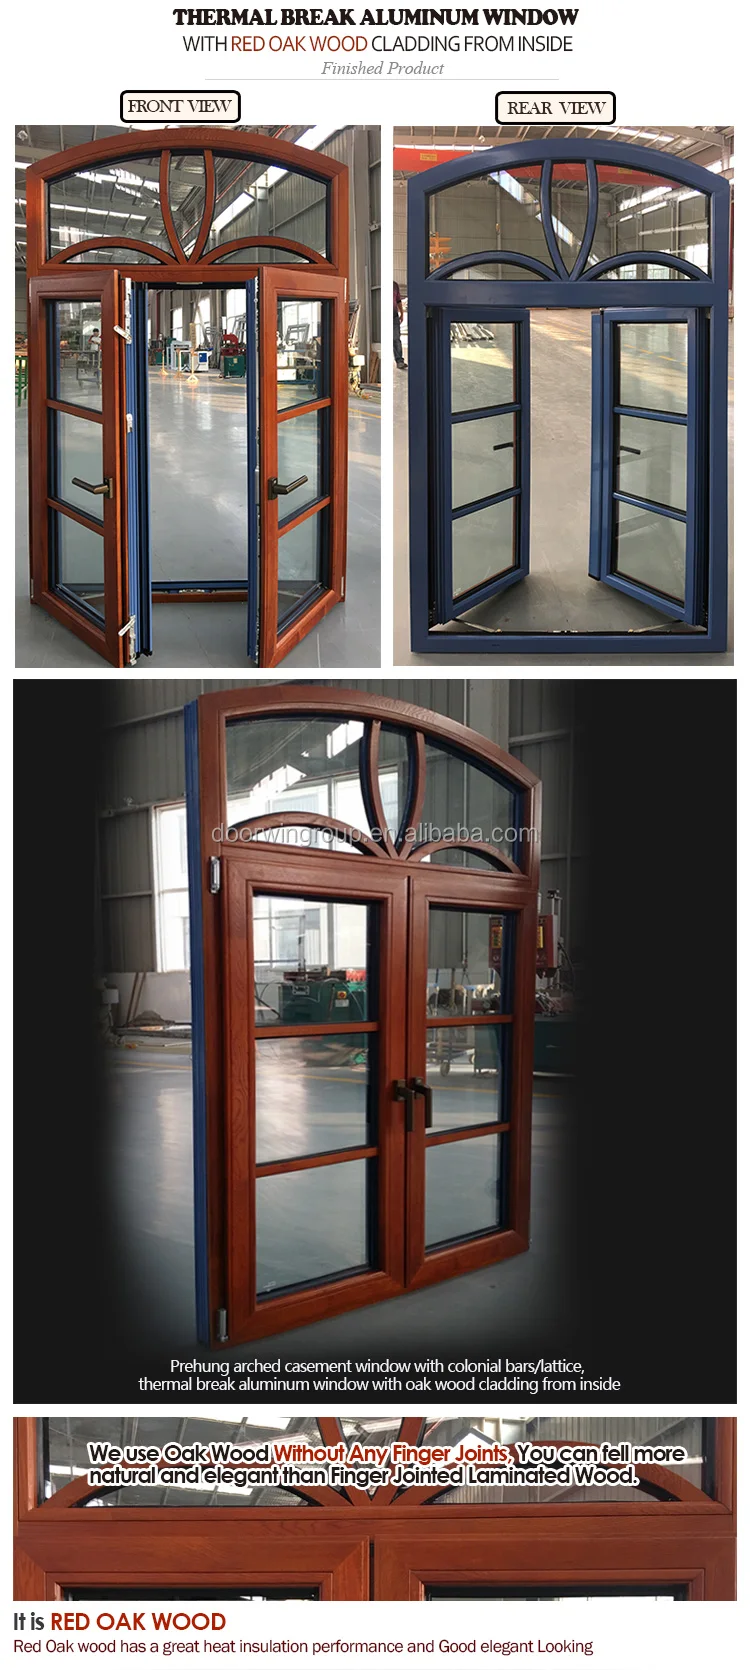 Large glass triple glazed american red oak wood arched top spanish style window